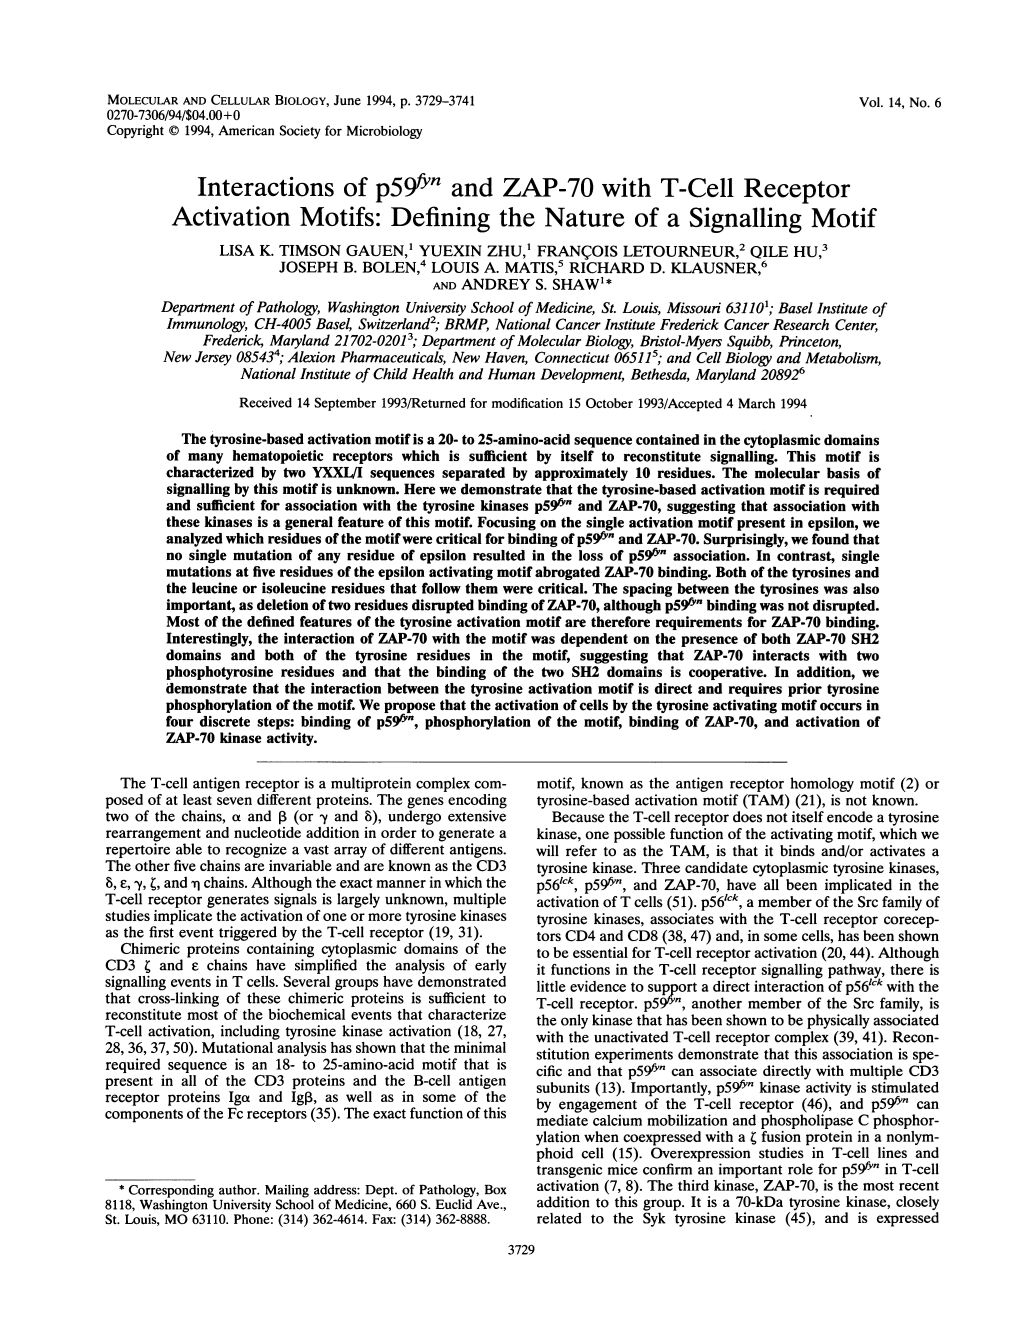 Interactions of P591fi and ZAP-70 with T-Cell Receptor Activation Motifs: Defining the Nature of a Signalling Motif LISA K